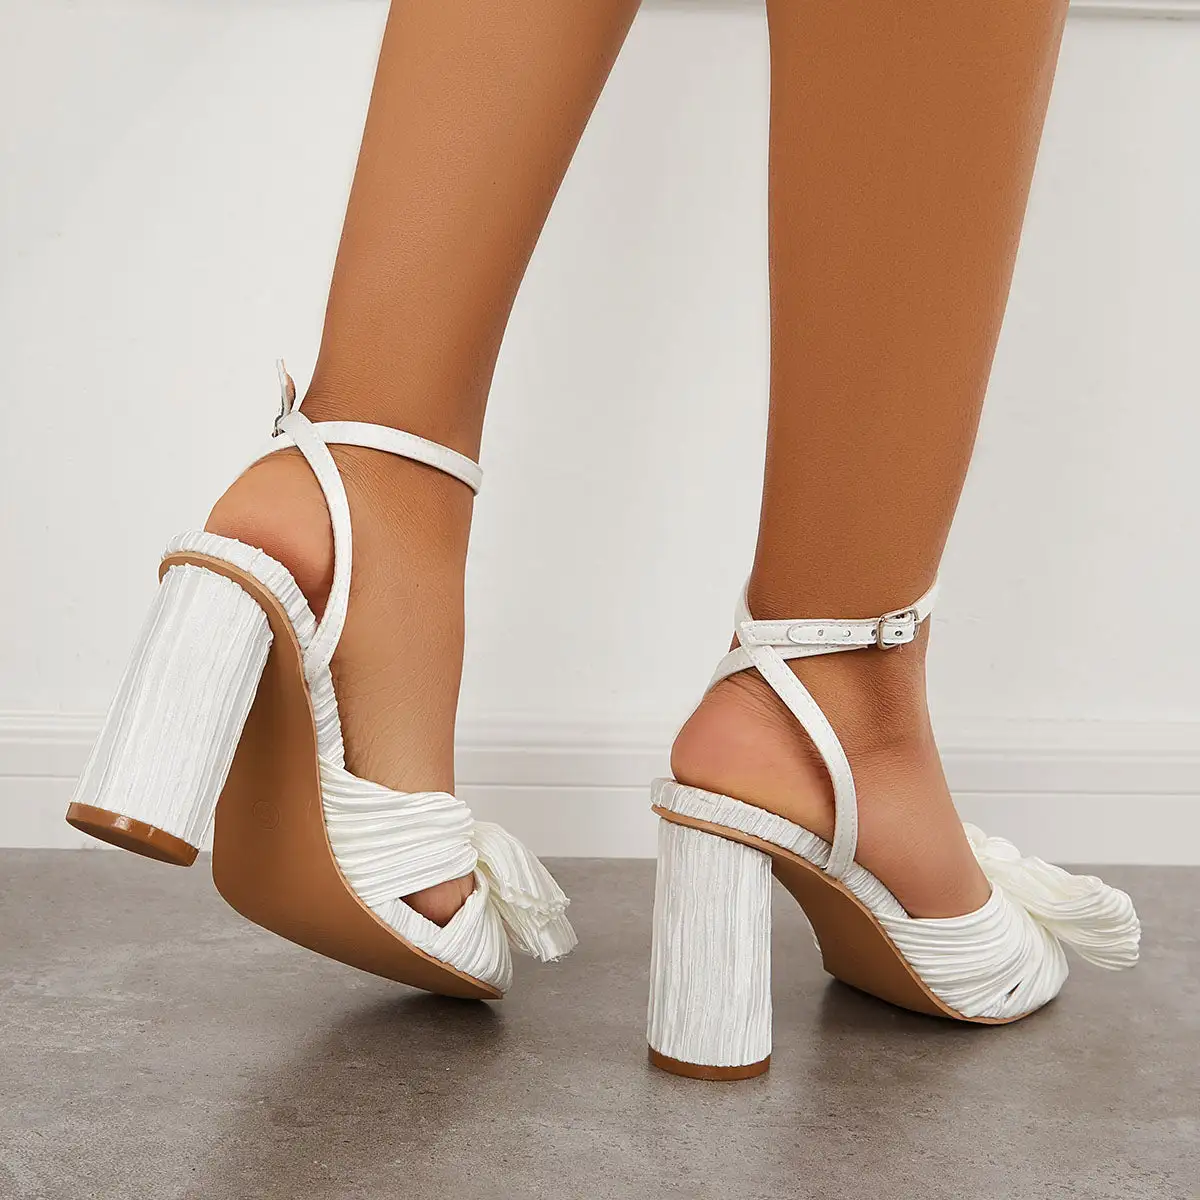 Pleated Bowknot Block Chunky Bridal Heels Ankle Strap Sandals